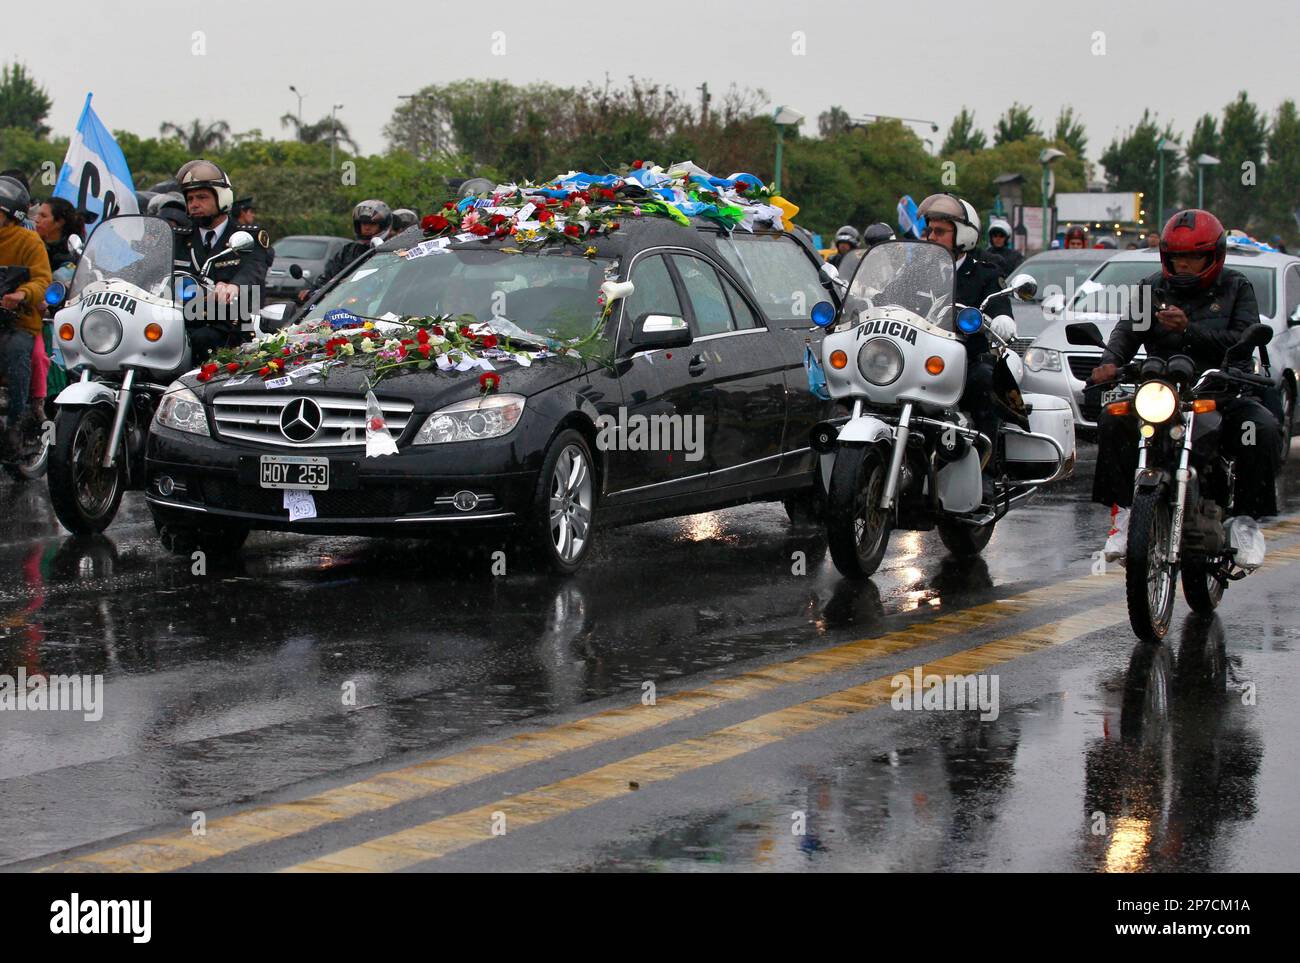 police-officers-guard-the-hearse-carrying-the-coffin-with-the-remains-of-late-argentinas-president-nestor-kirchner-during-a-funeral-procession-to-the-airport-through-the-streets-of-buenos-aires-argentina-friday-oct-29-2010-kirchners-remains-will-be-flown-to-rio-gallegos-in-the-southern-region-of-patagonia-where-he-was-born-for-burial-ap-photoroberto-candia-2P7CM1A.jpg